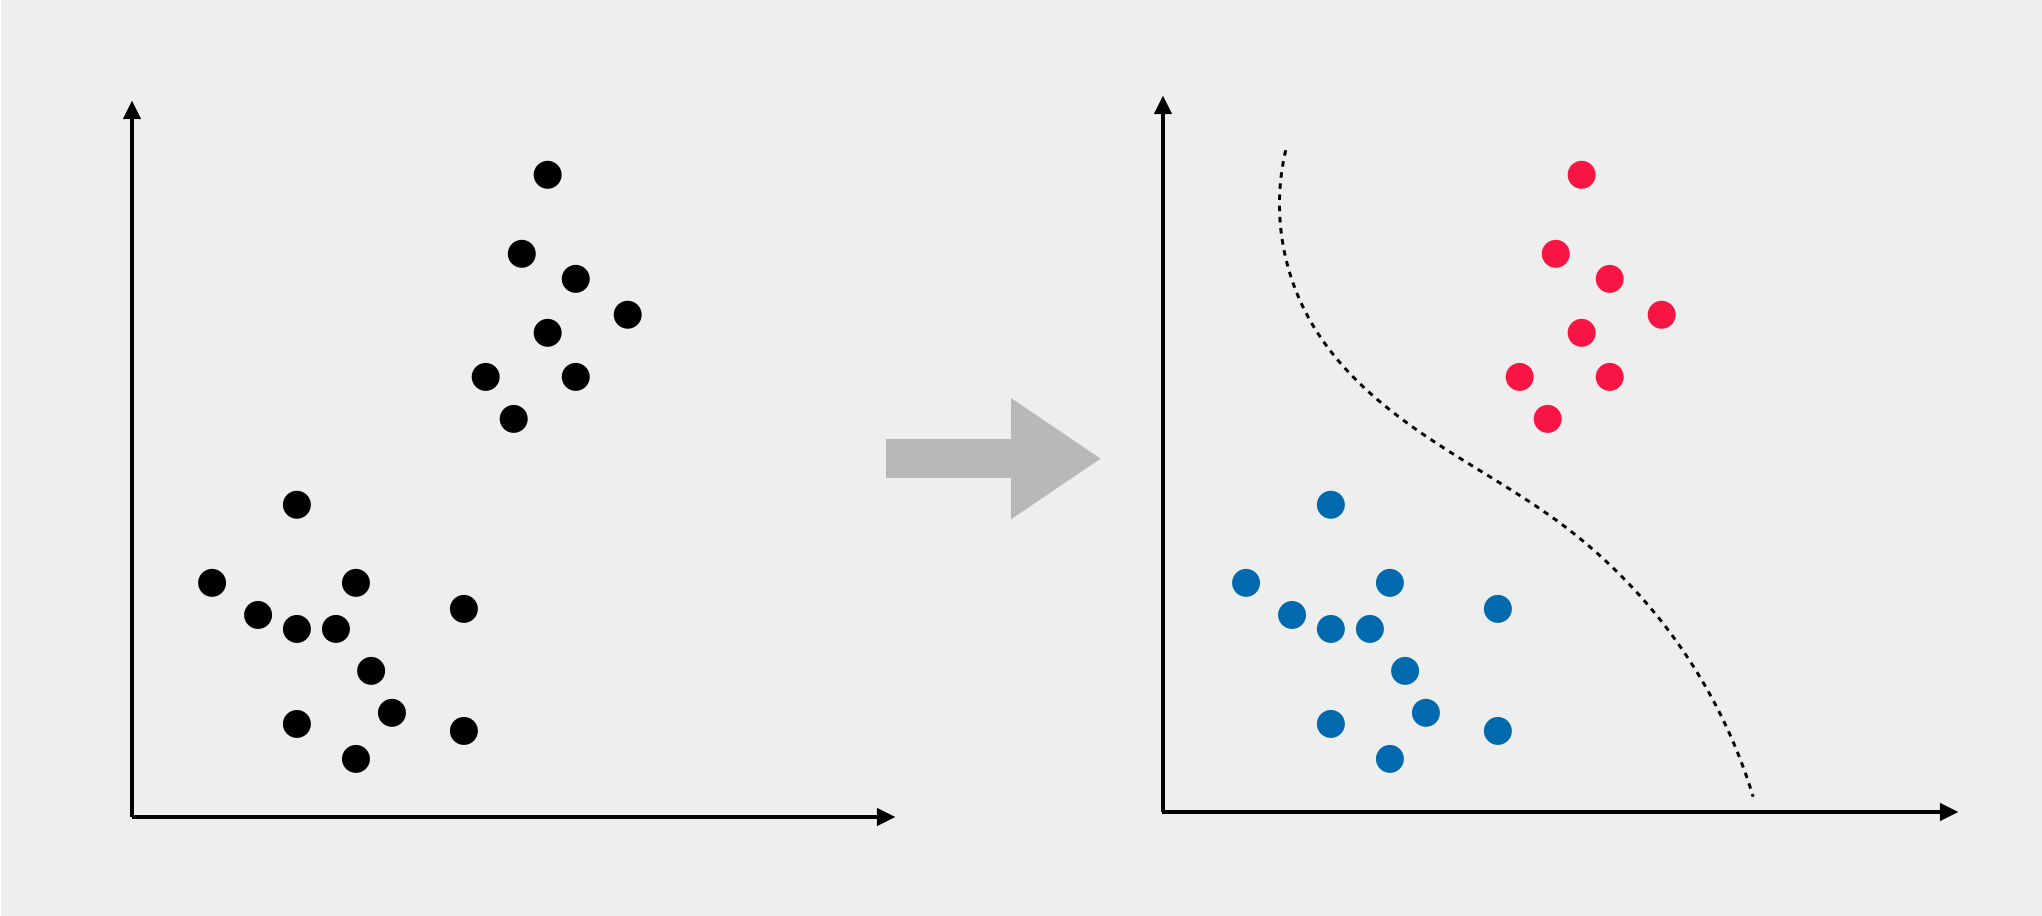 Example of Unsupervised Learning Task: Clustering